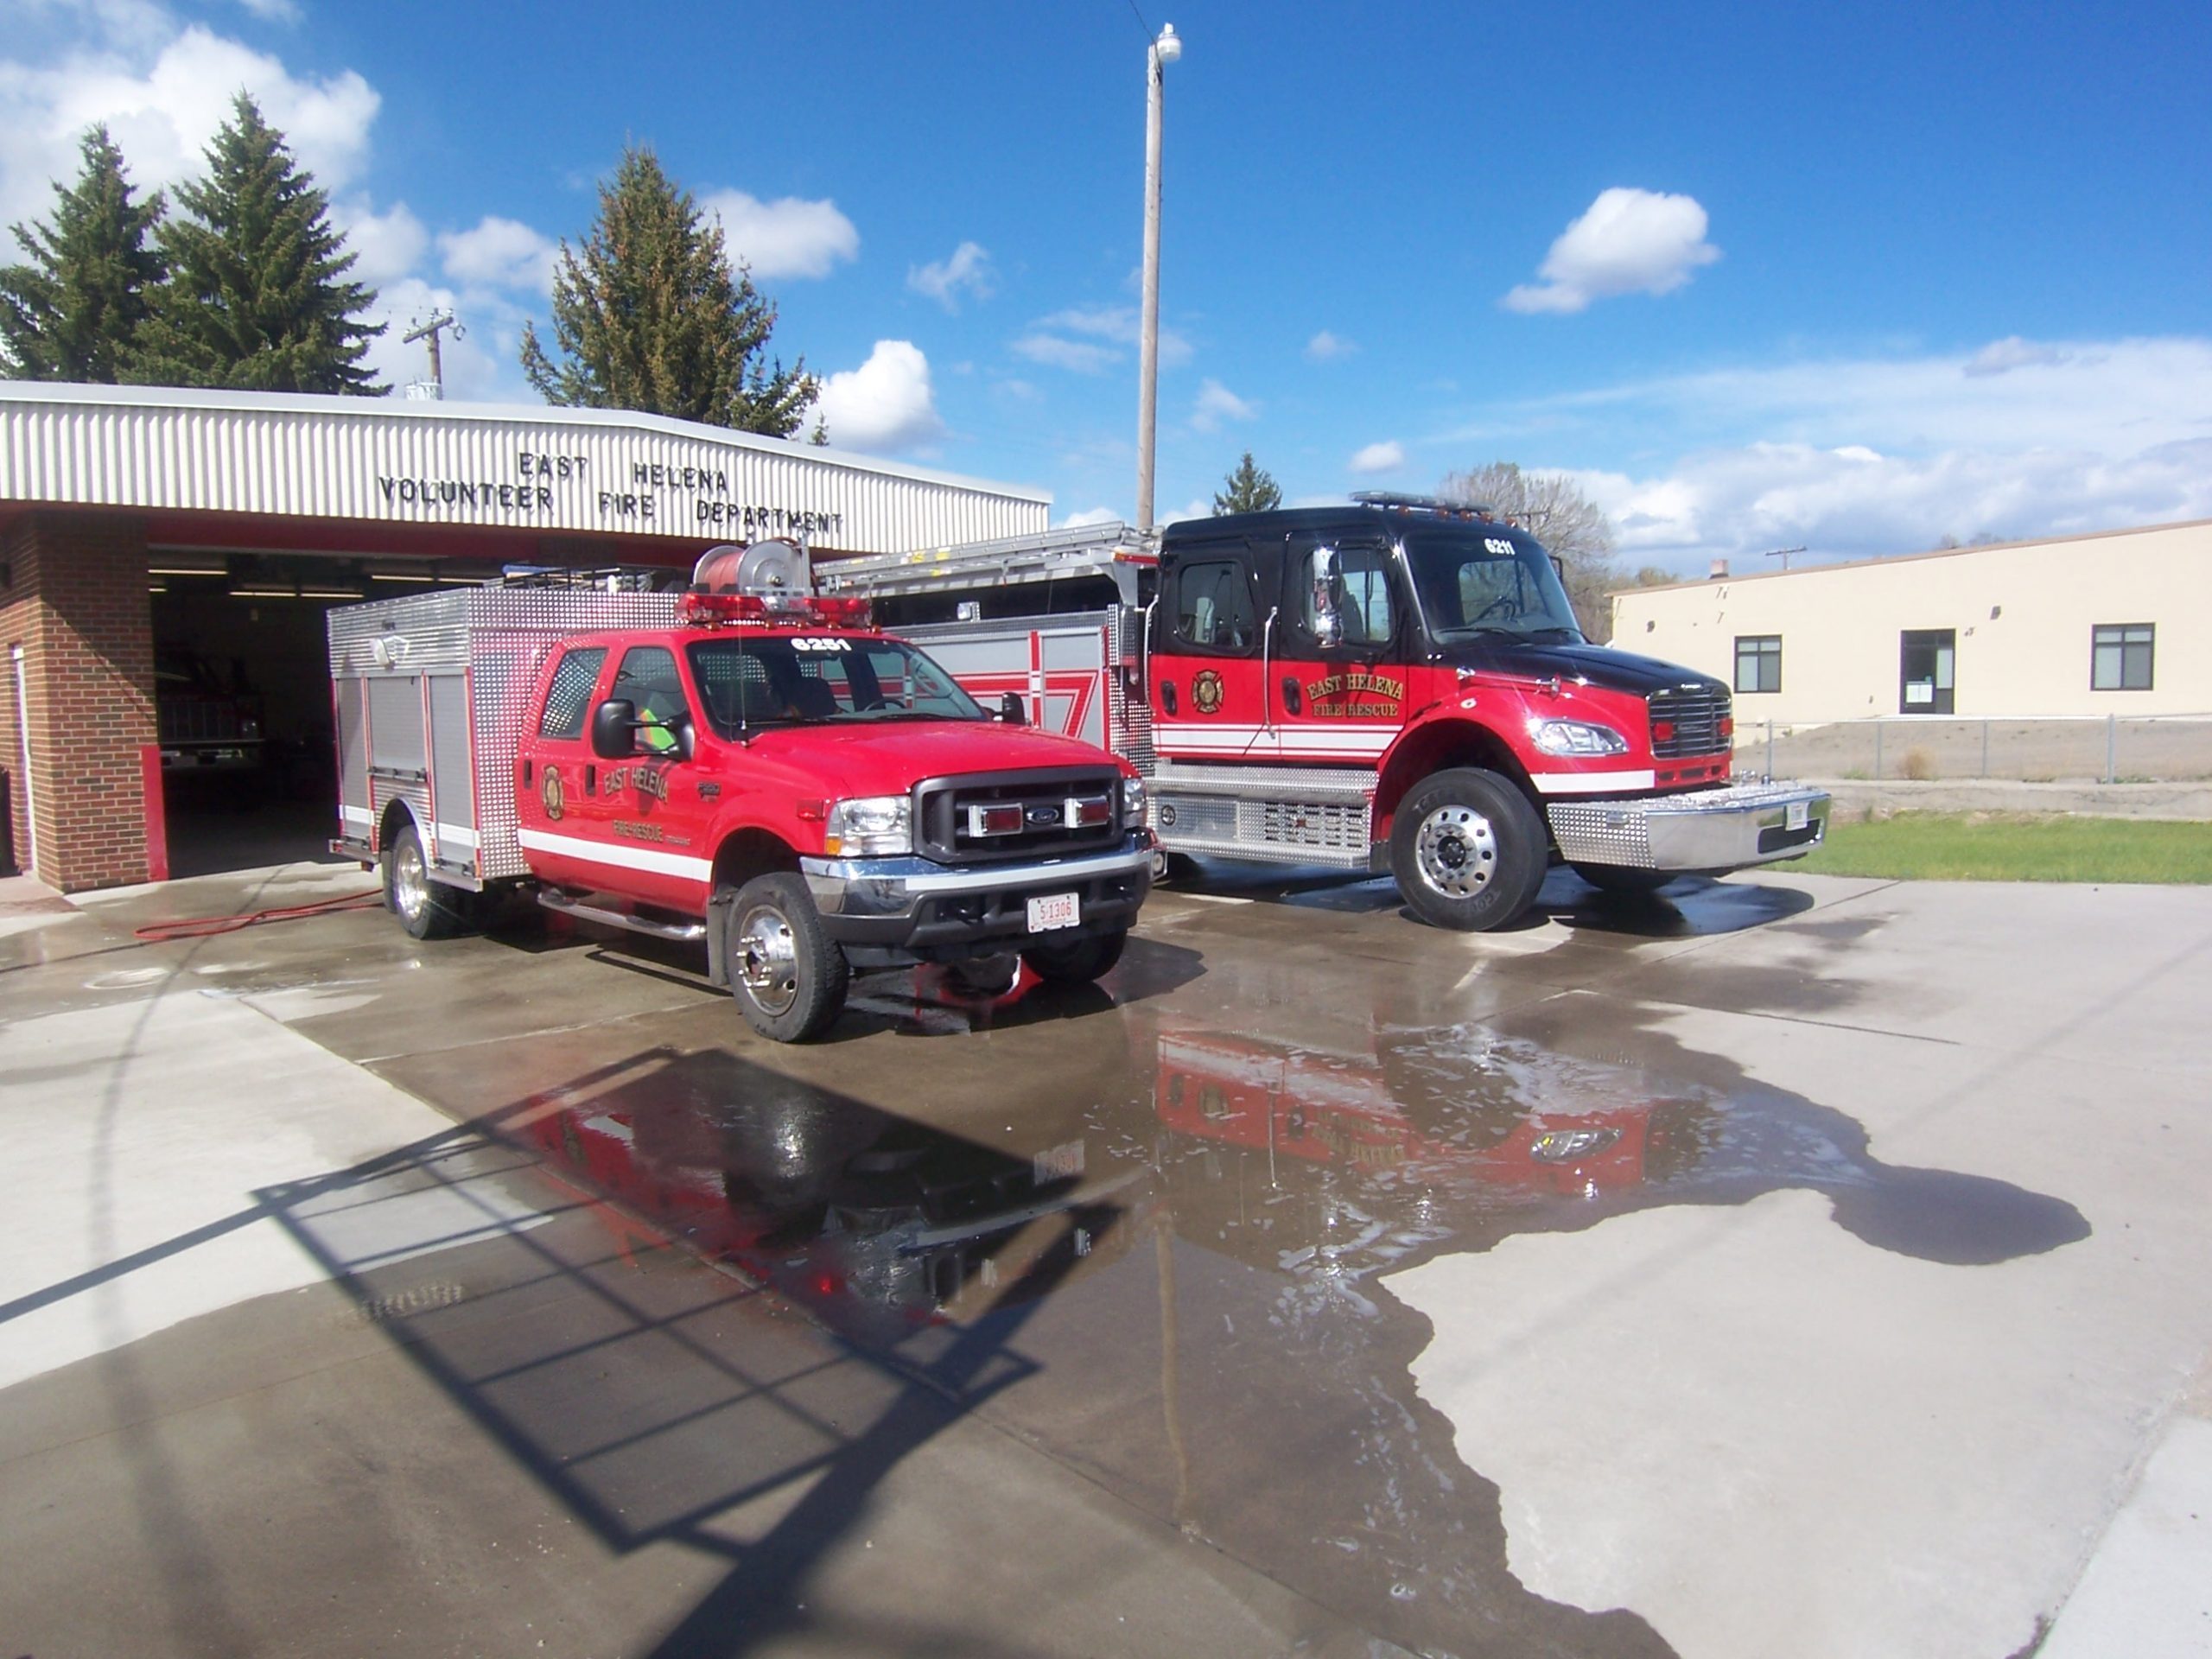 Two East Helena Fire Rescue Trucks at the Fire Station.